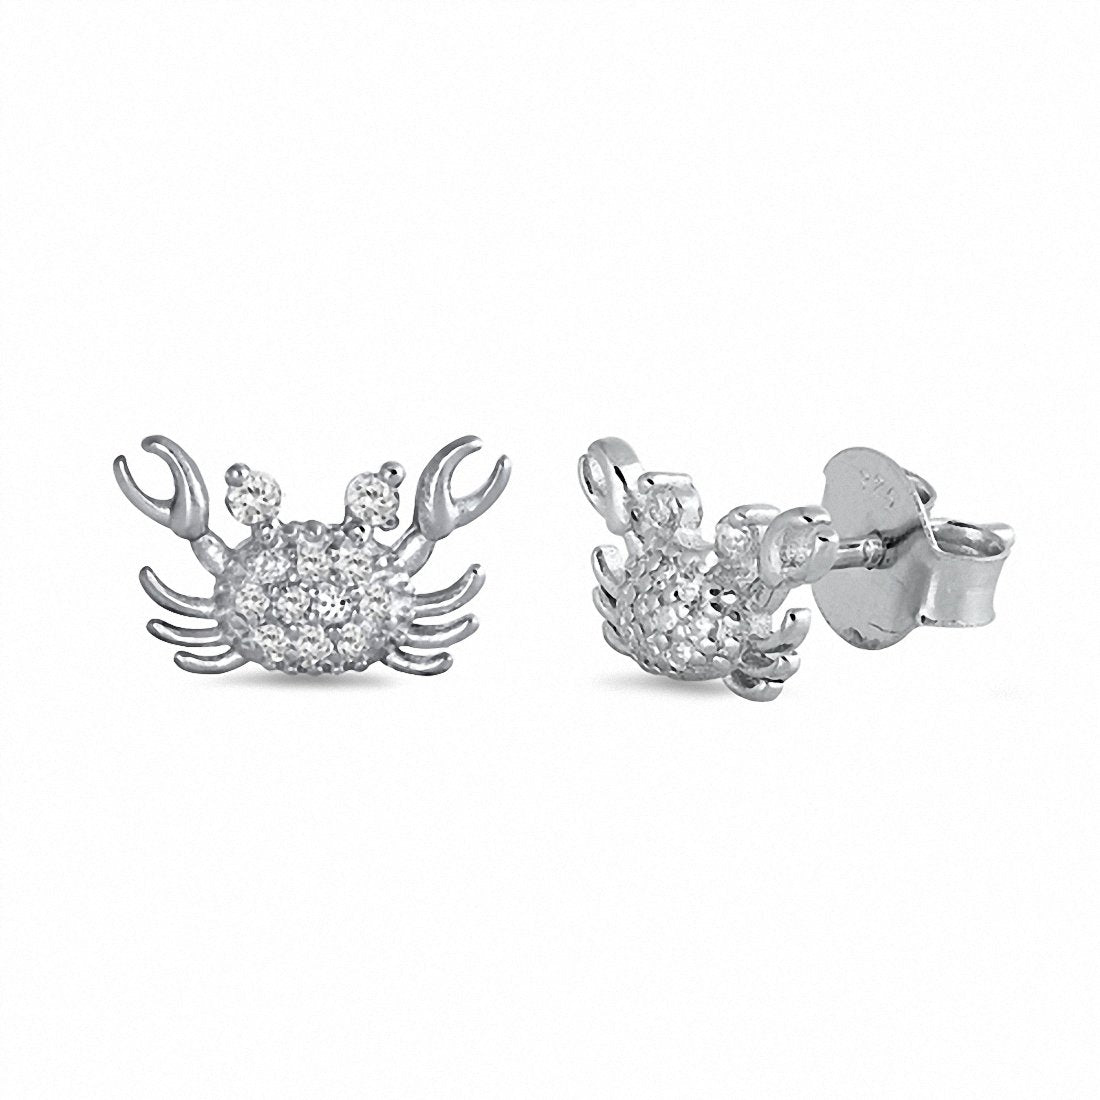 Crab Stud Earrings Round Pave Cubic Zirconia 925 Sterling Silver (7MM)